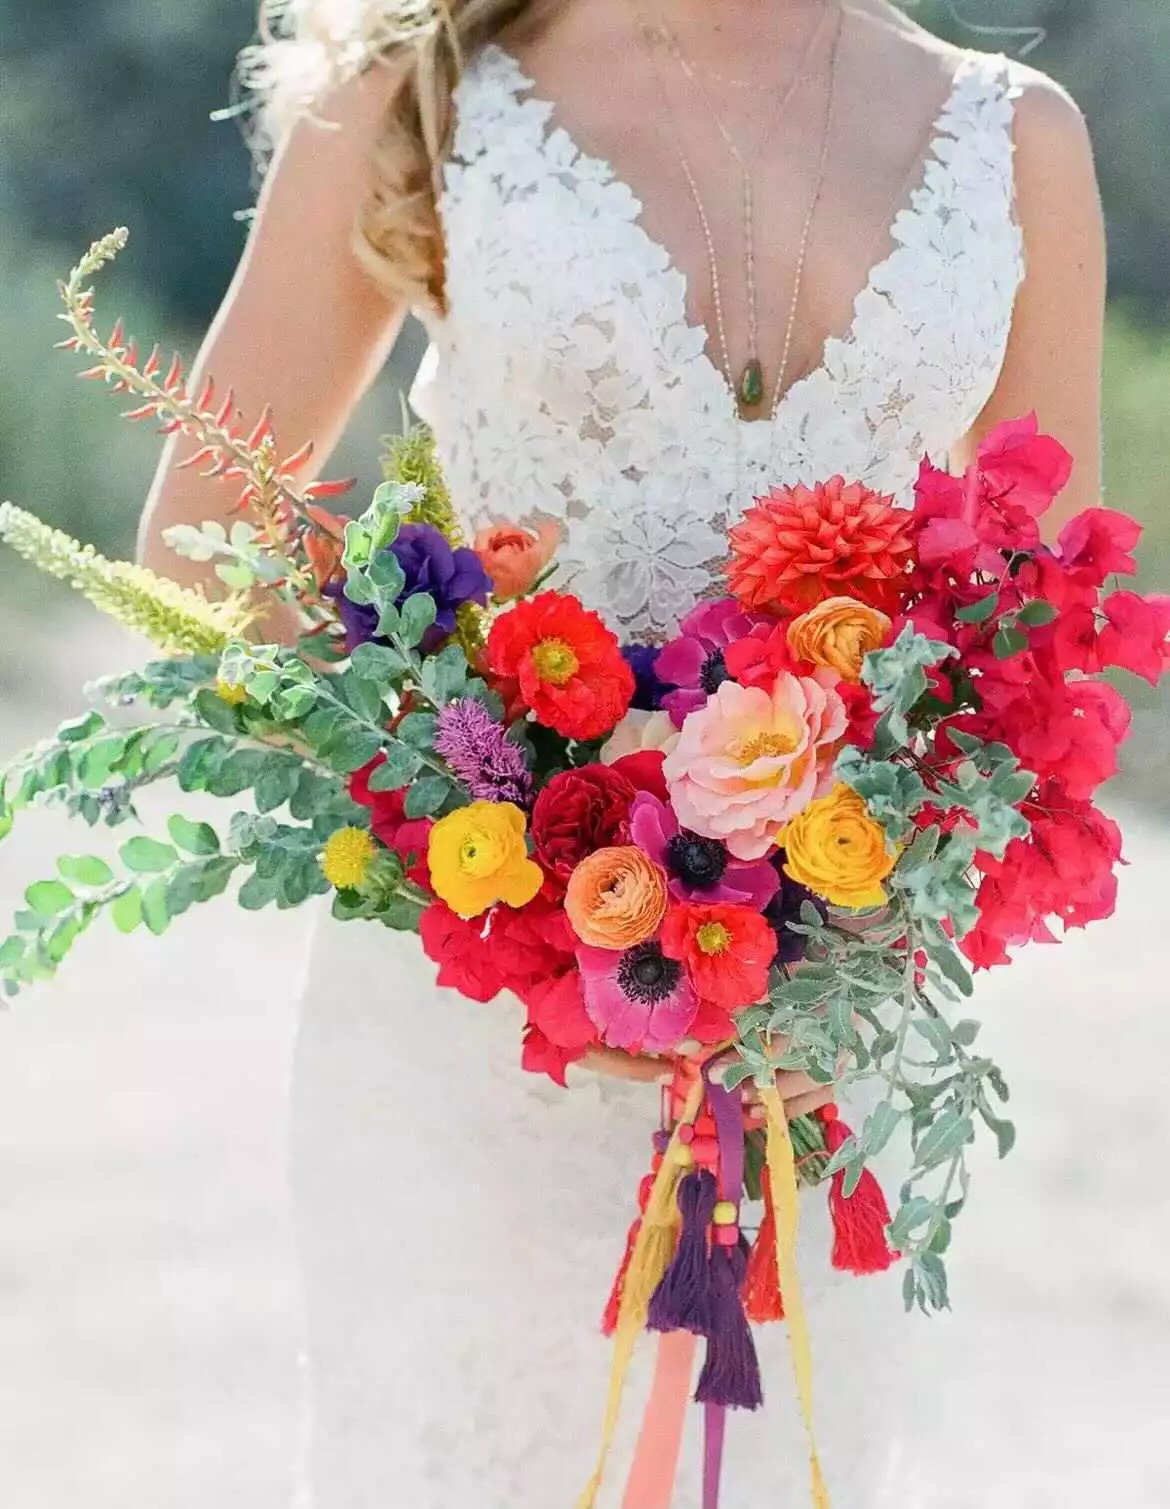 Wedding Bouquets: From Multi-Hued & Asymmetric To Monochrome & Perfectly Spherical Wedding Bouquets And The Best Wedding Styles To Pair Them With